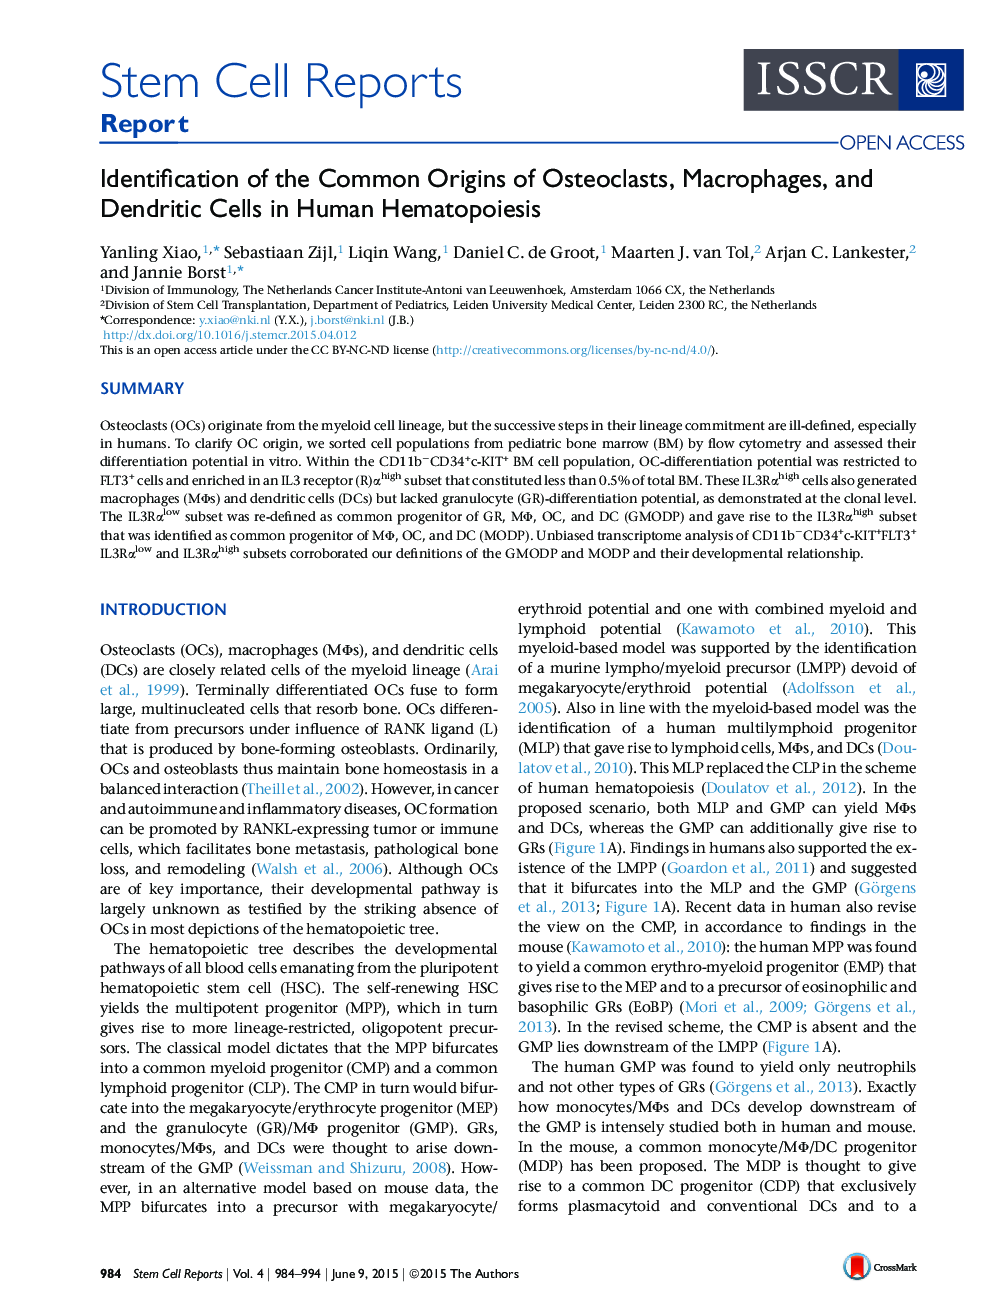 Identification of the Common Origins of Osteoclasts, Macrophages, and Dendritic Cells in Human Hematopoiesis 